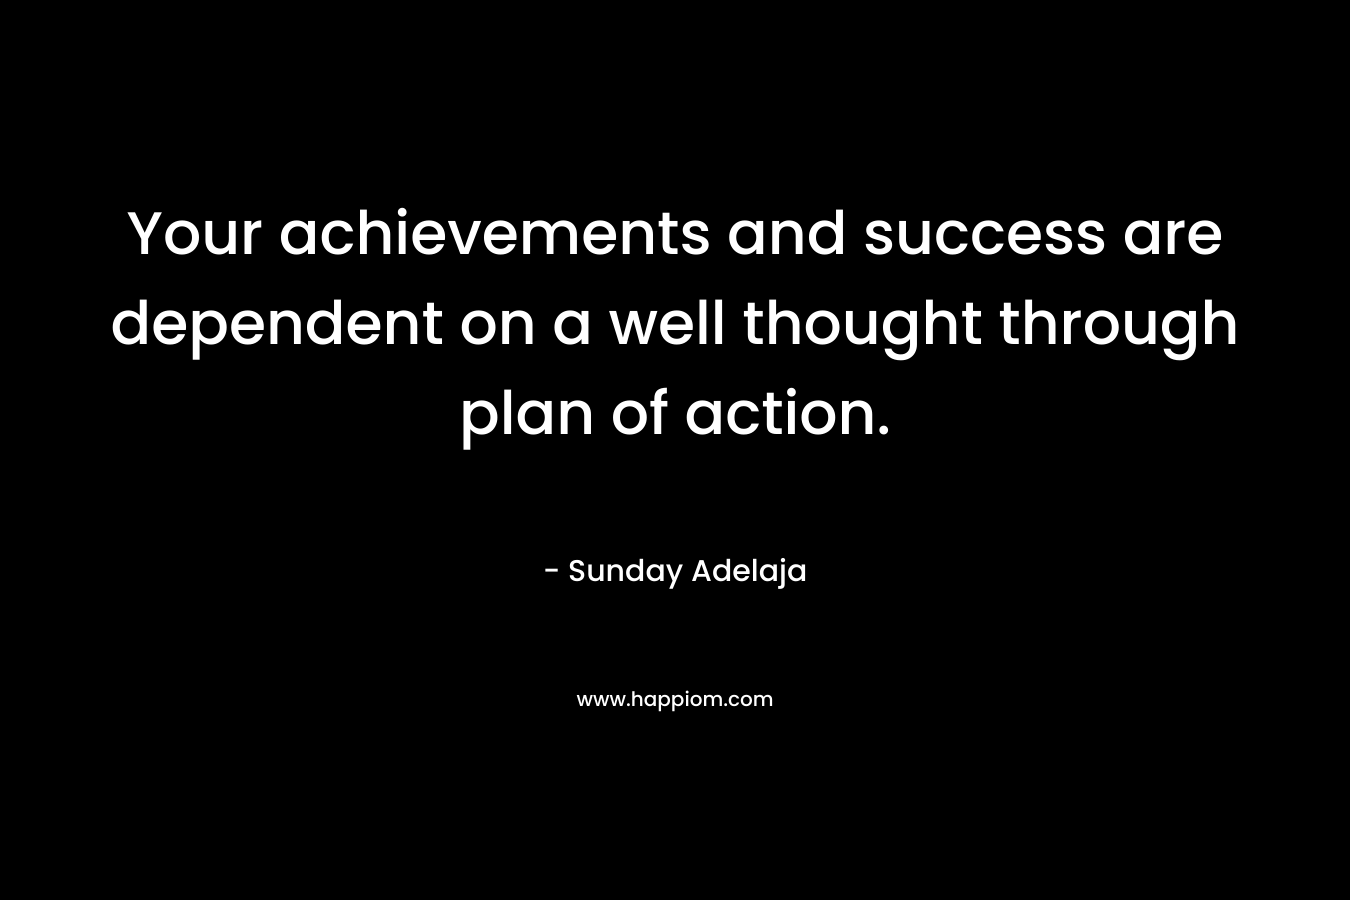 Your achievements and success are dependent on a well thought through plan of action.